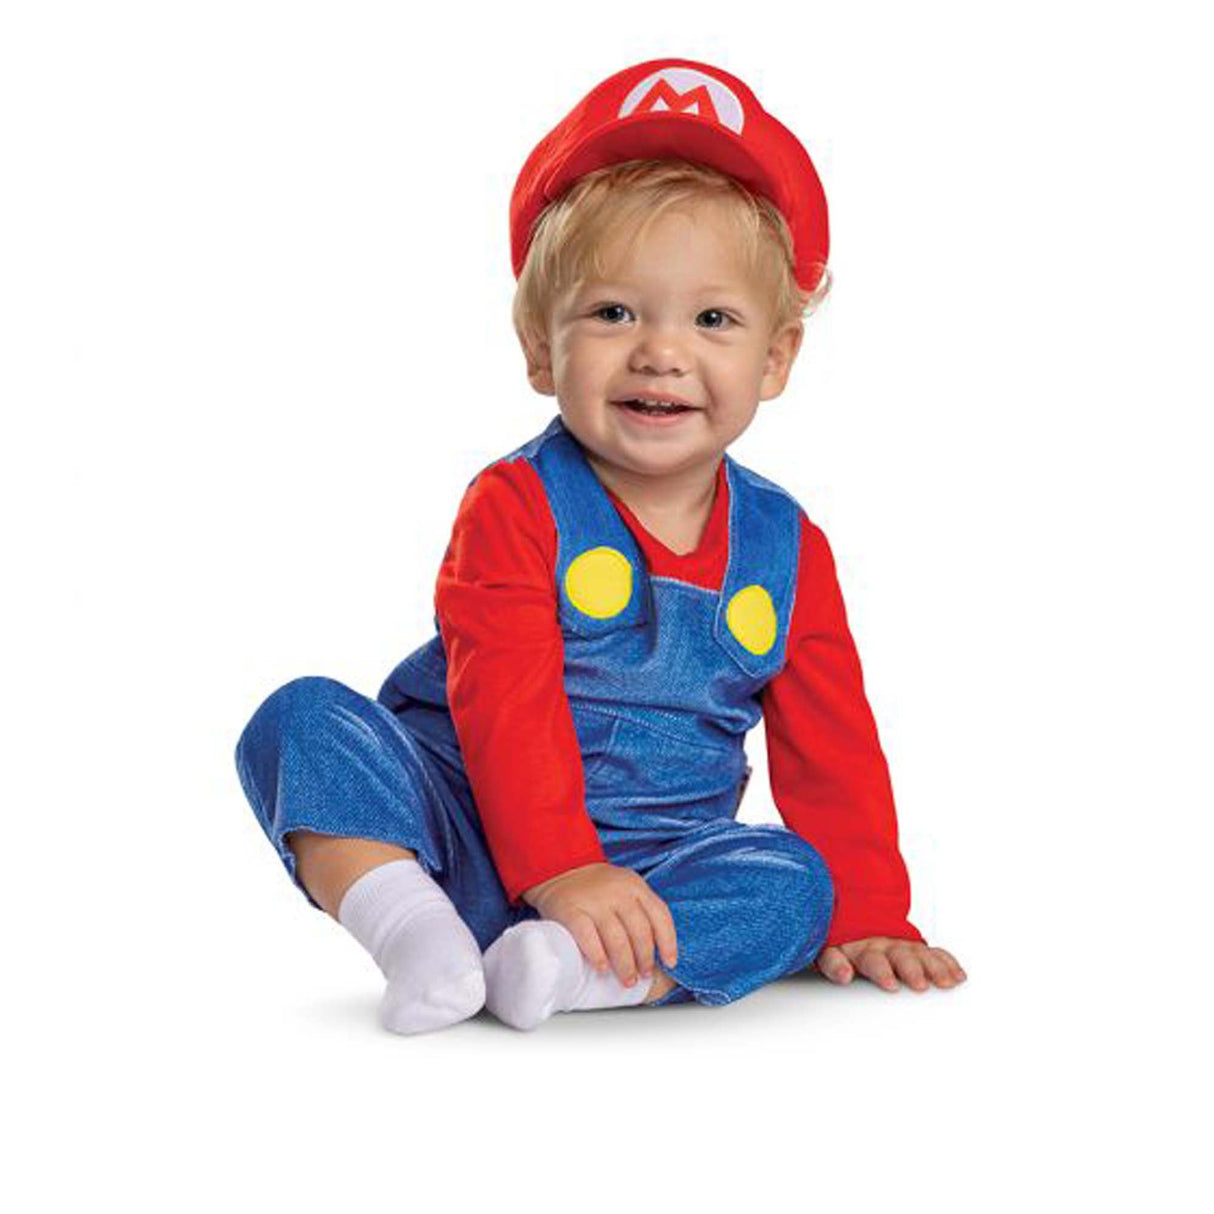 DISGUISE (TOY-SPORT) Costumes Nintendo Super Mario Bros Mario Costume for Babies, Red and Blue Jumpsuit